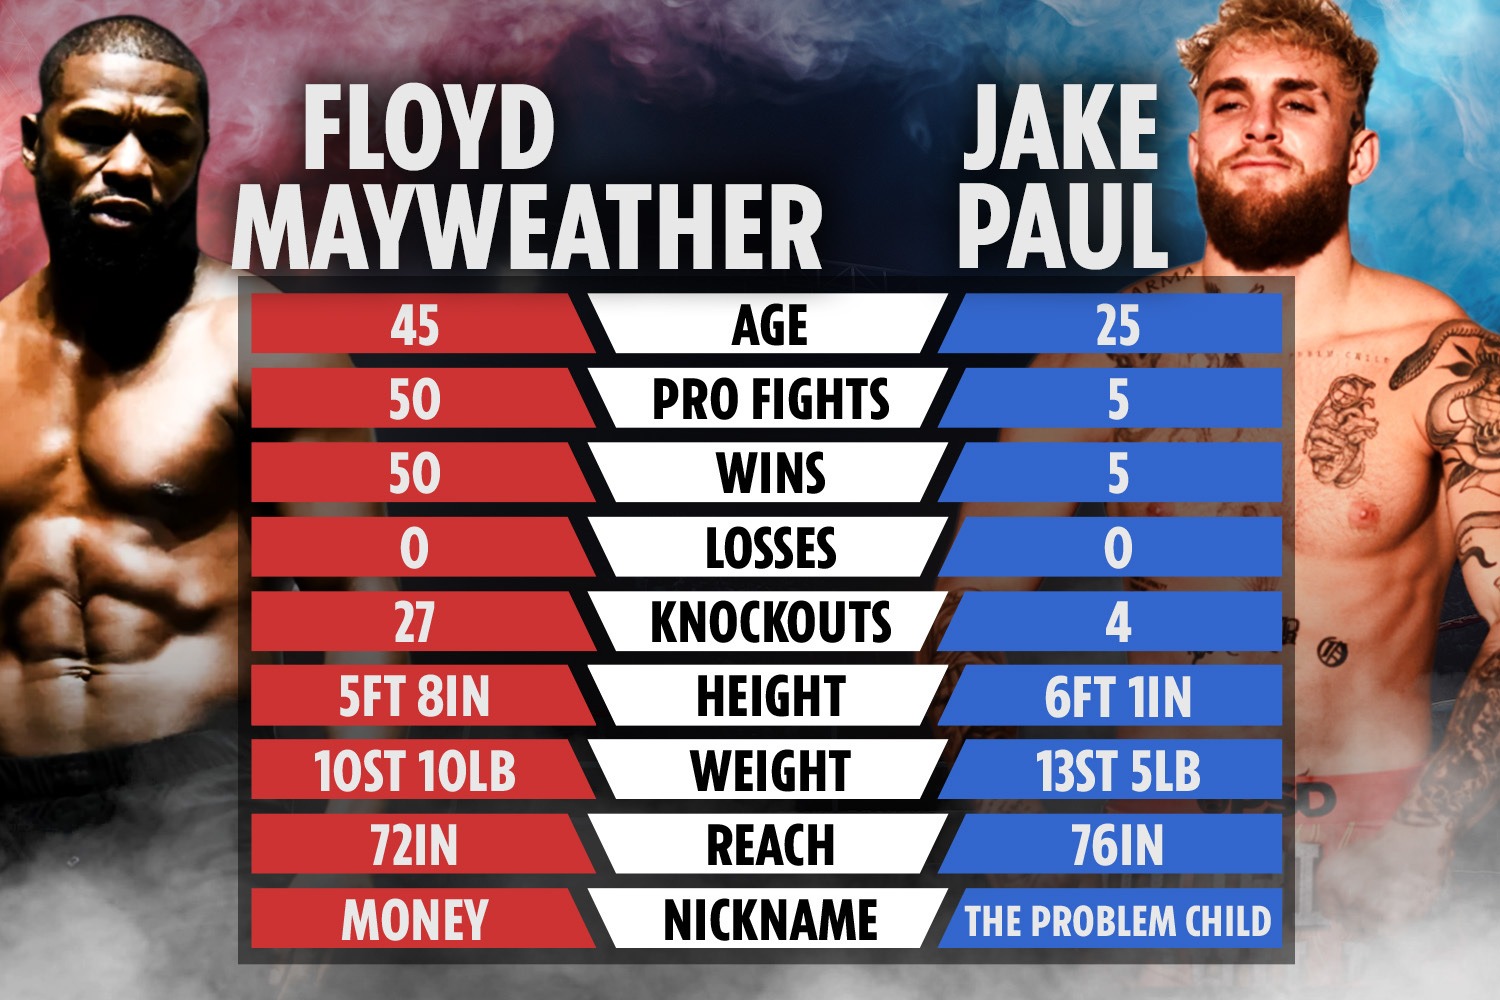 , Jake Paul calls out Floyd Mayweather and slams boxing legend for ‘ruining his legacy’ in exhibitions